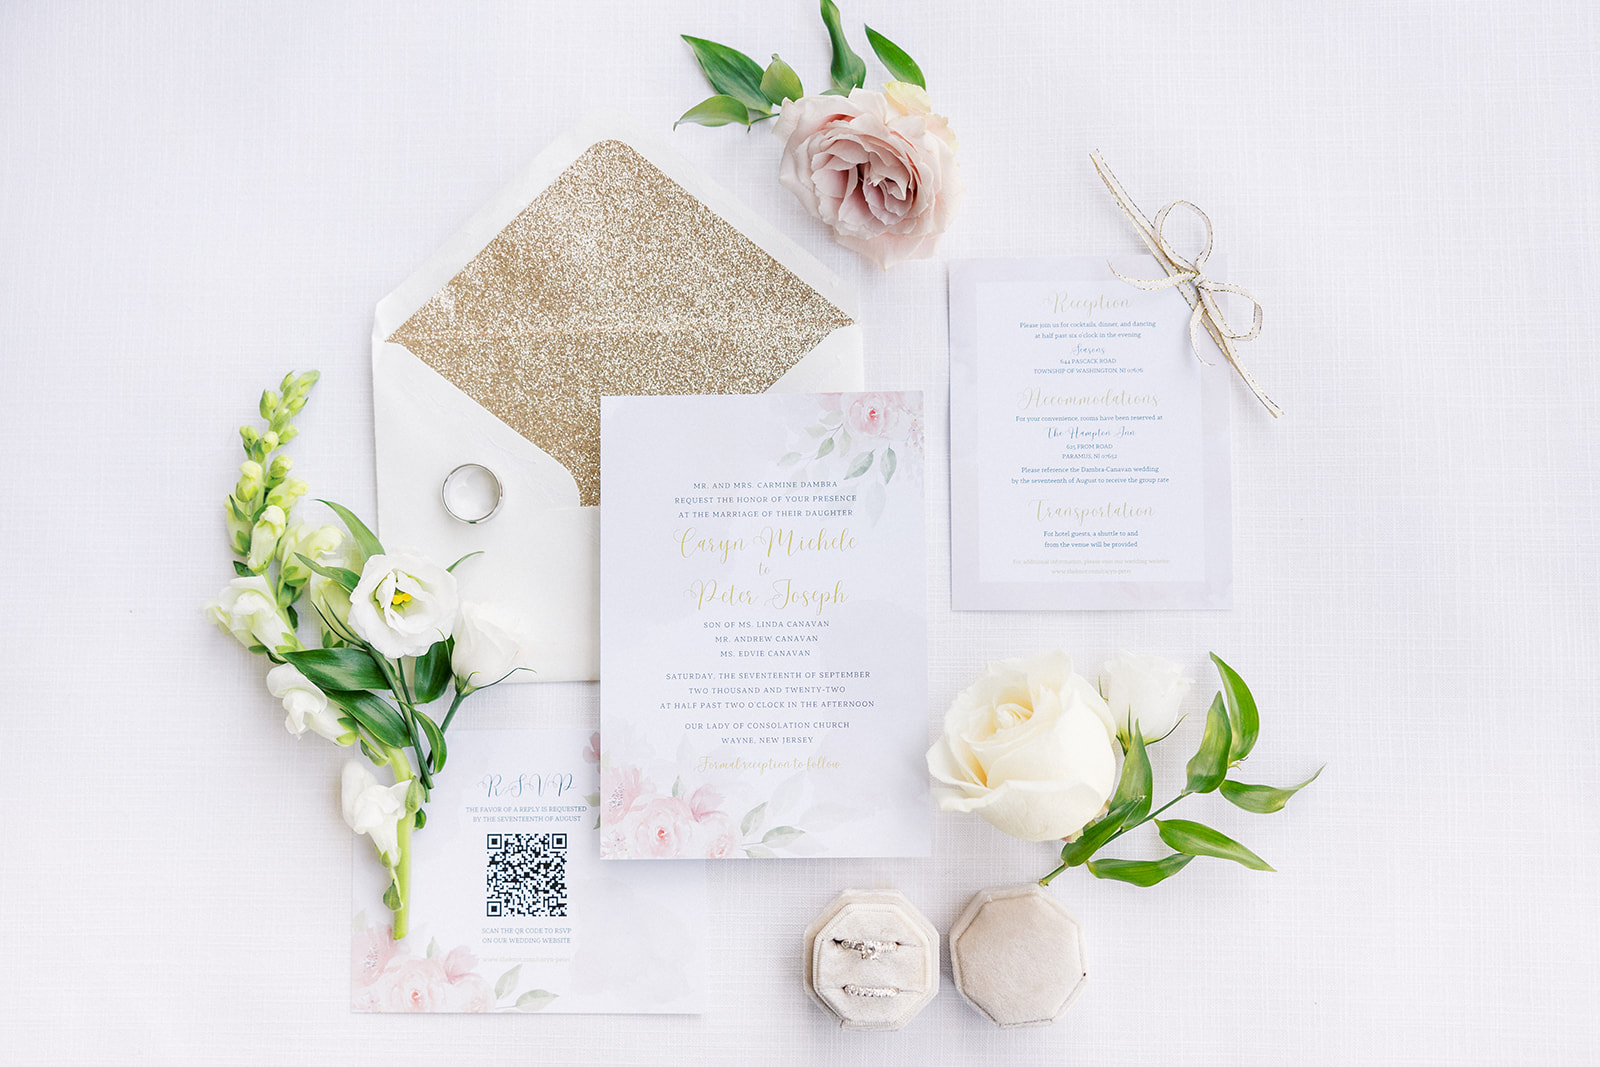 Details of wedding invitations and rings on a white table